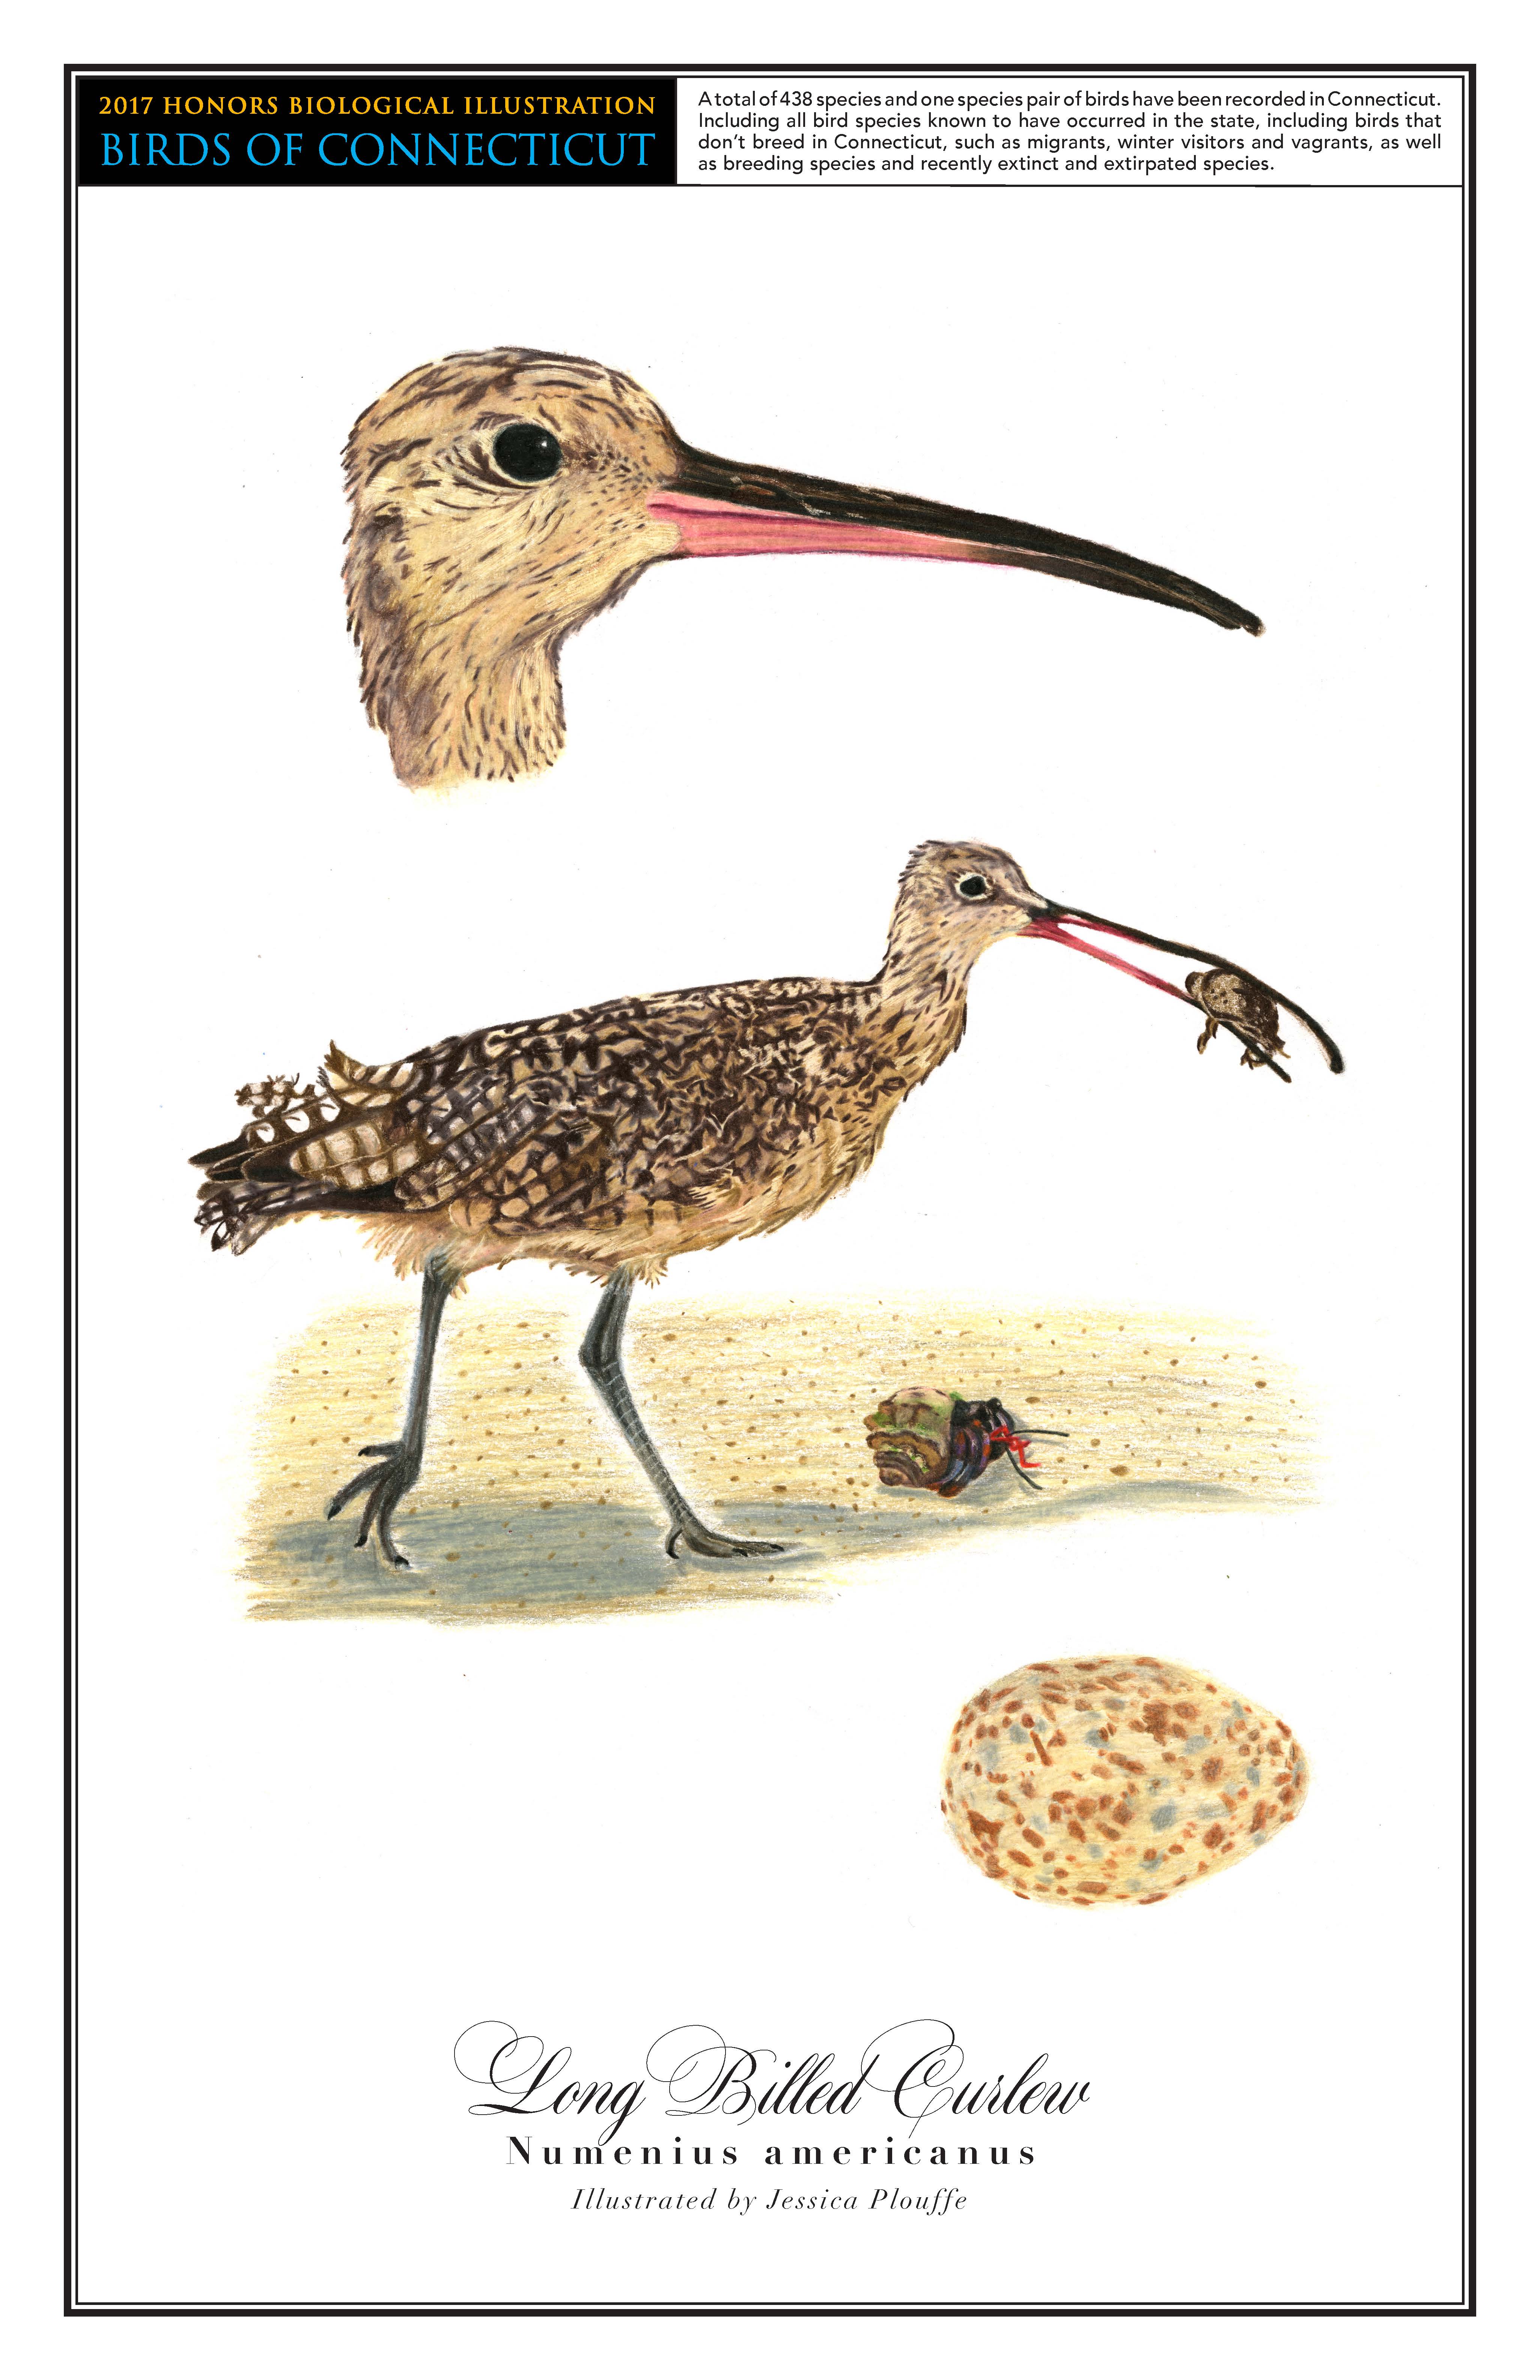 The long billed curlew has a light brown head and a mostly black body. A drawing of it eating an insect as it stands next to a crab is in the center of the page. A close up drawing of its head is above it, and its brown- and blue-speckled egg is in the bottom right corner.